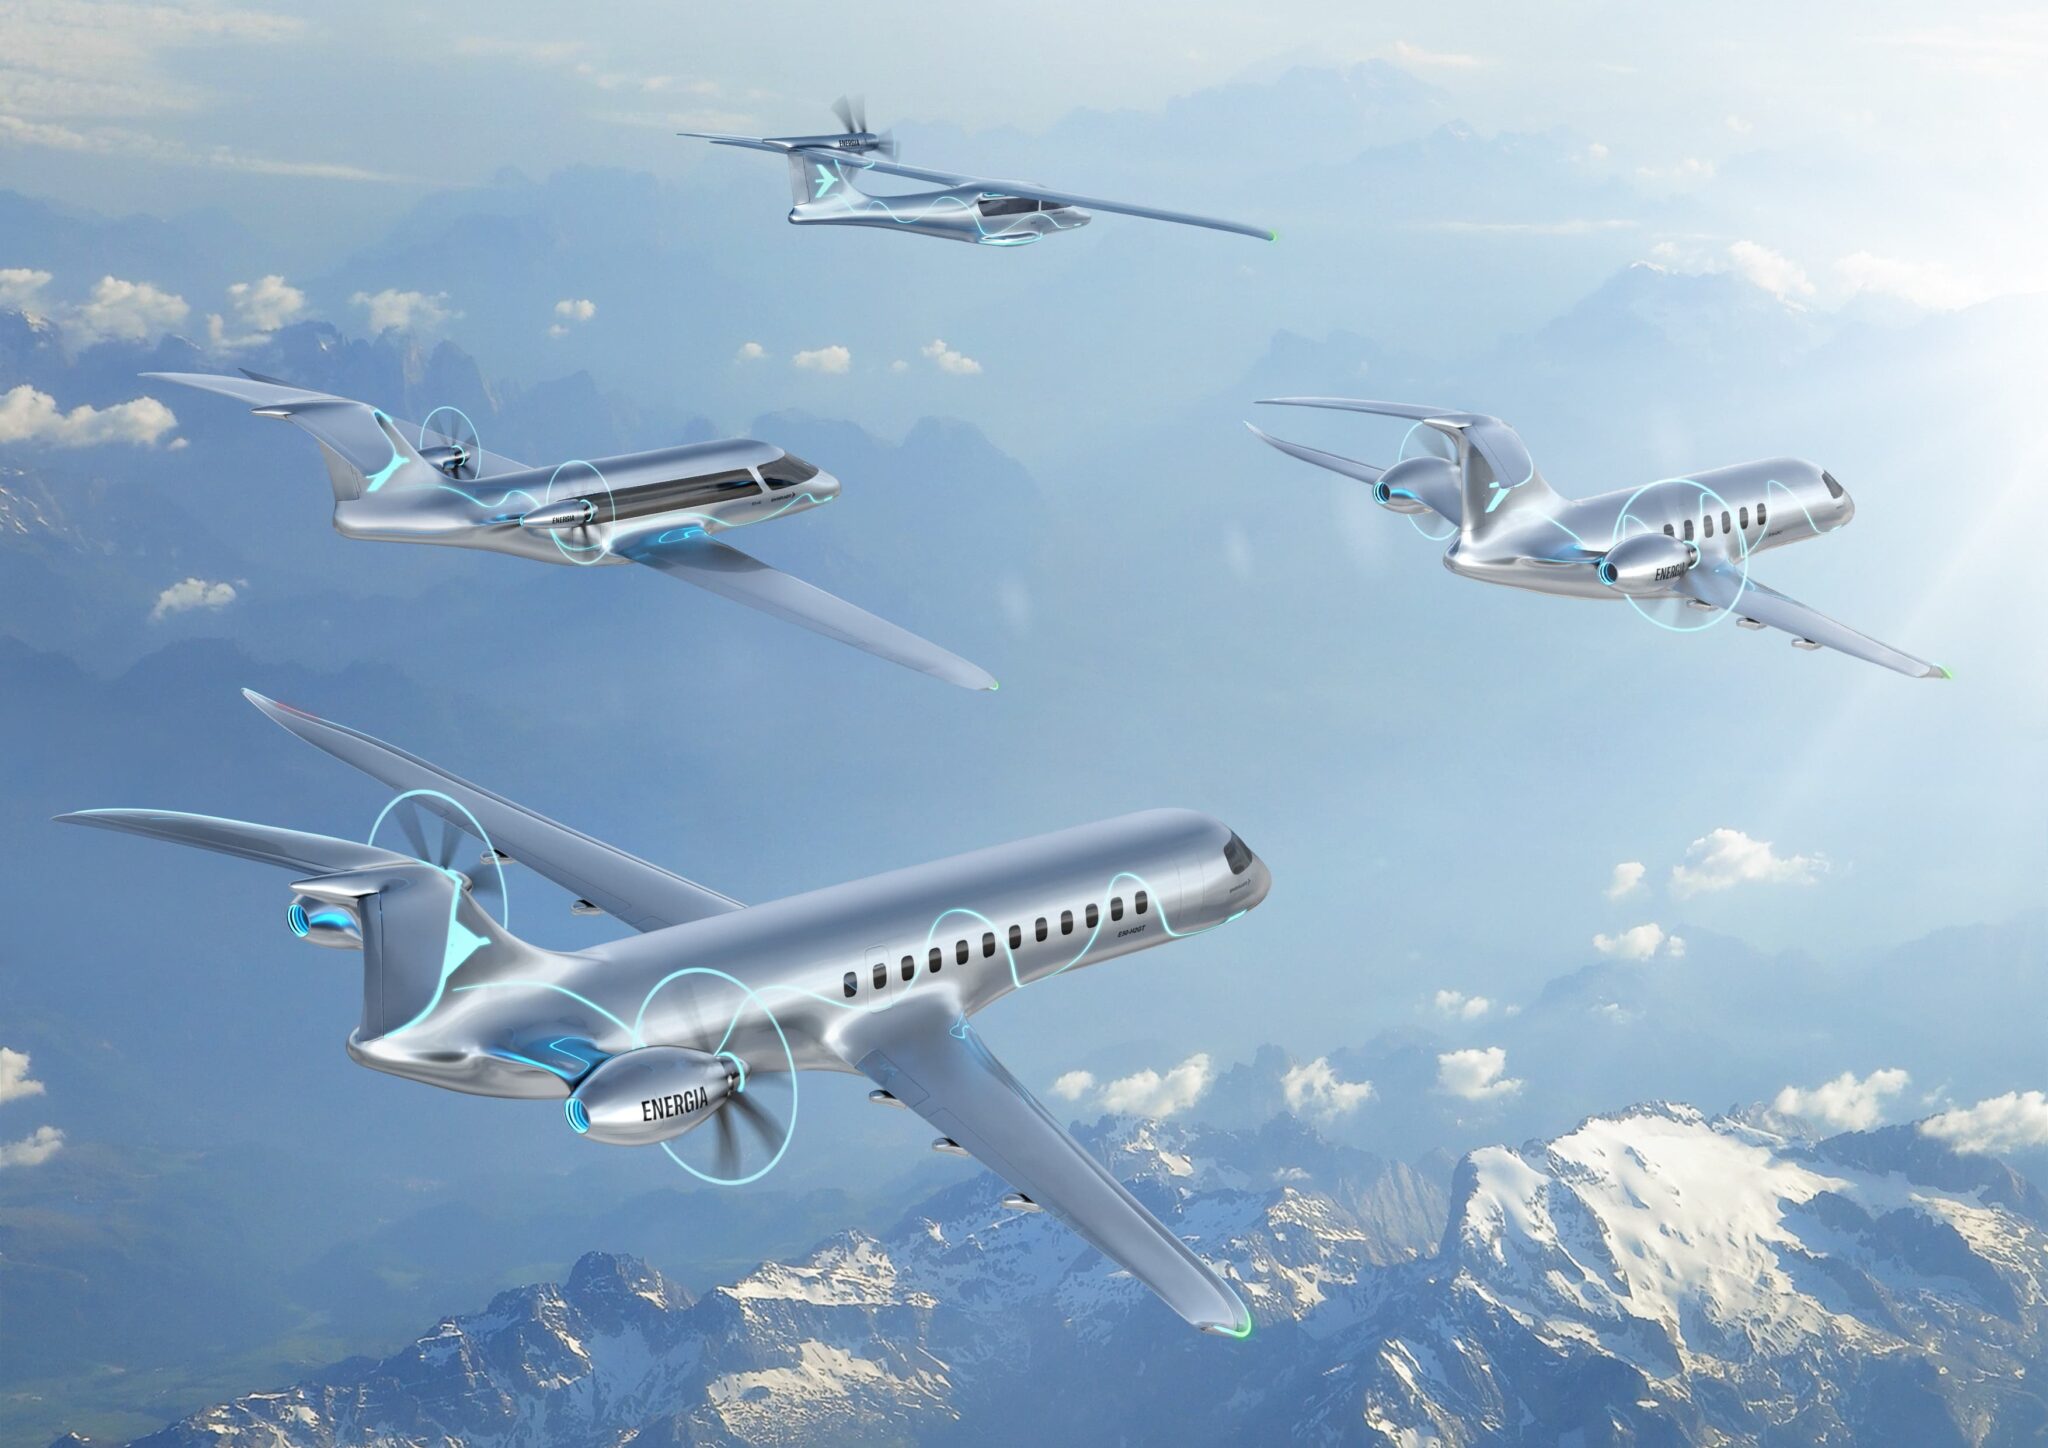 Embraer presents the Energia Family: four new aircraft concepts using renewable energy propulsion technologies - Aviation24.be